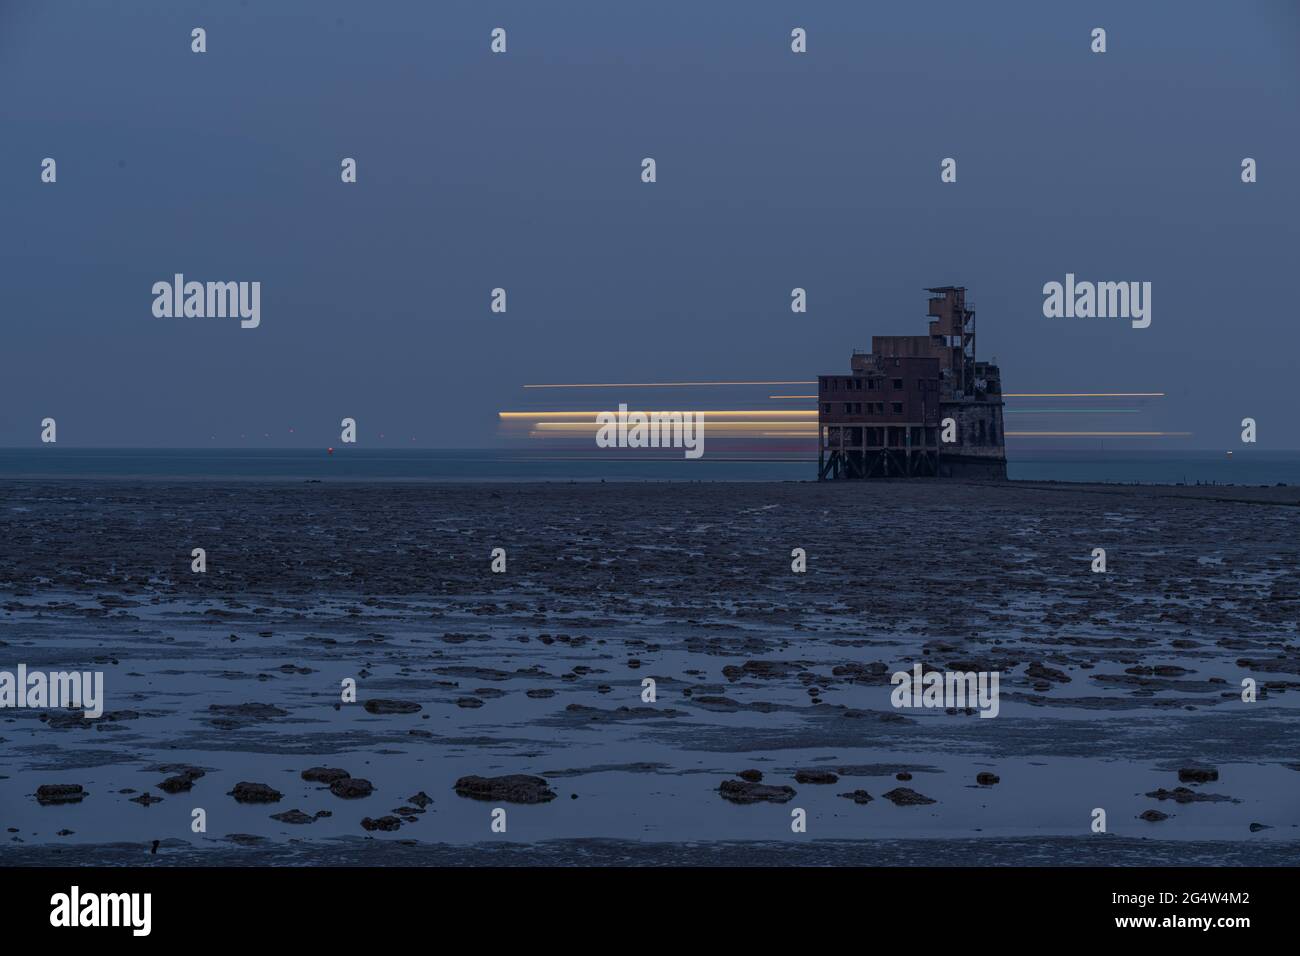 Blurred lights of a Ship moving behind Grain fort at dusk Stock Photo